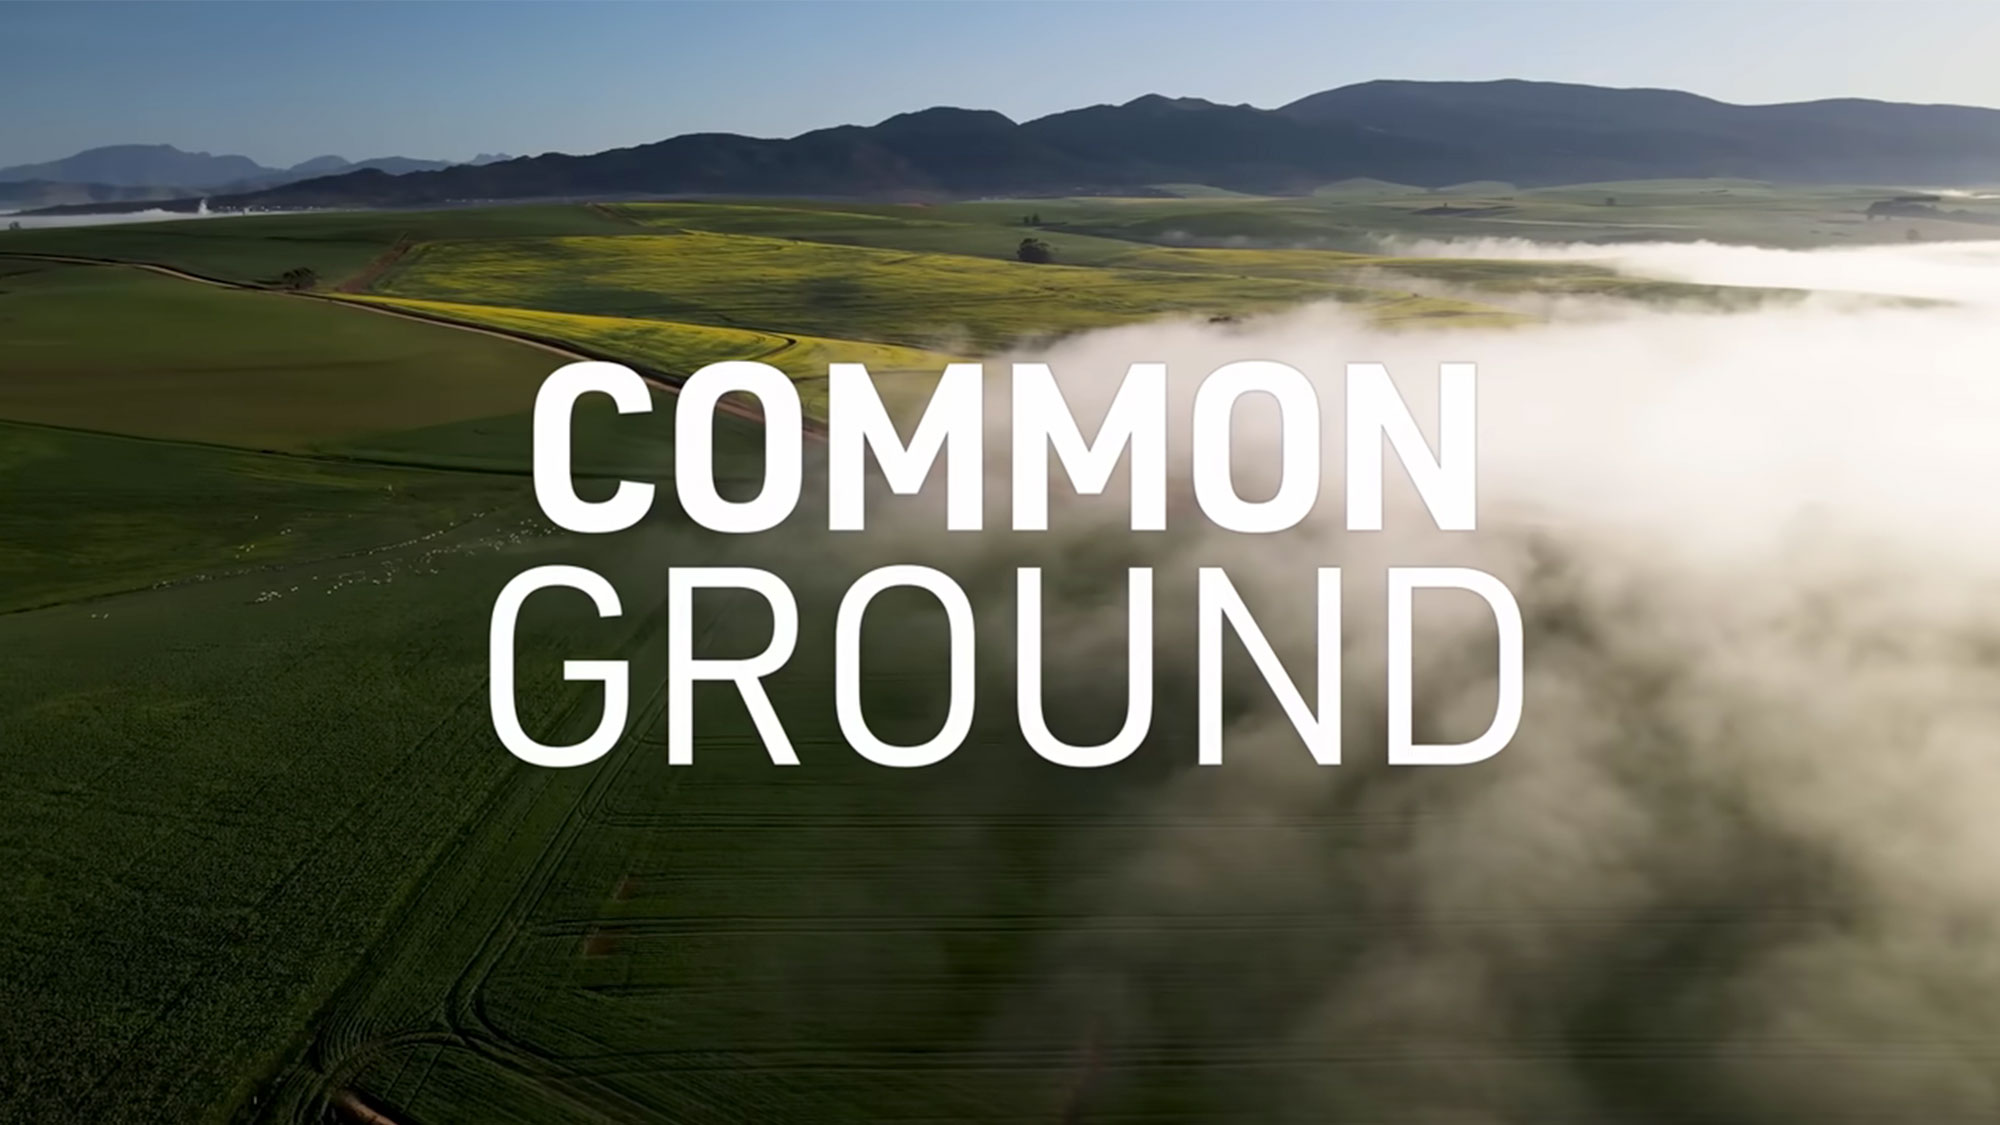 A screening of the movie “Common Ground” will take place Nov. 26 at 1:30 p.m. at the Mary Riepma Ross Media Arts Center and a discussion led by University of Nebraska–Lincoln’s Professor Emeritus Charles Francis will follow.